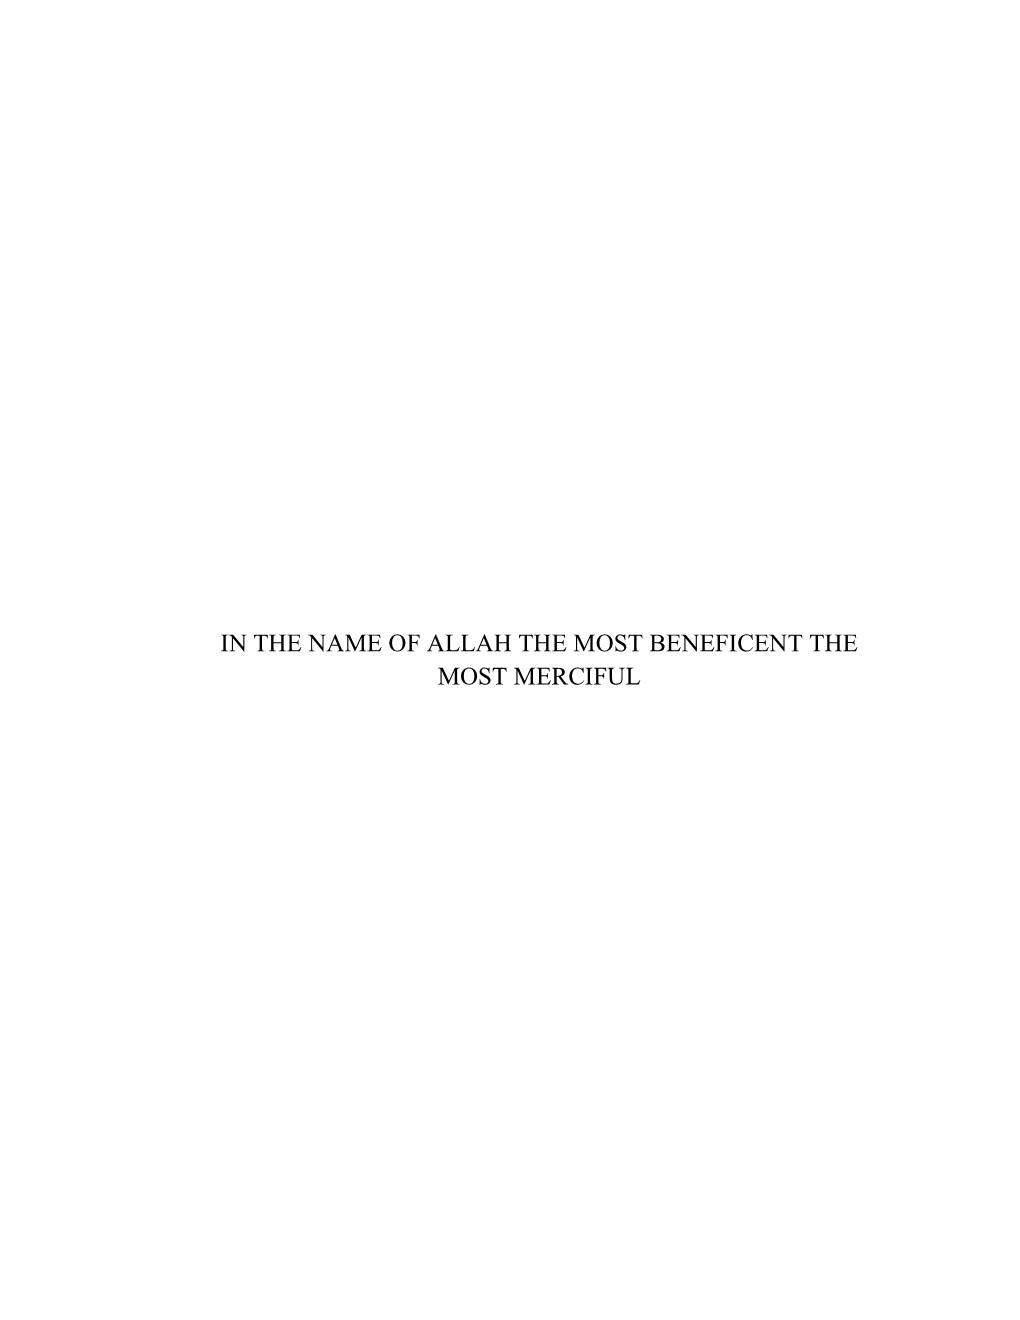 In the Name of Allah the Most Beneficent the Most Merciful